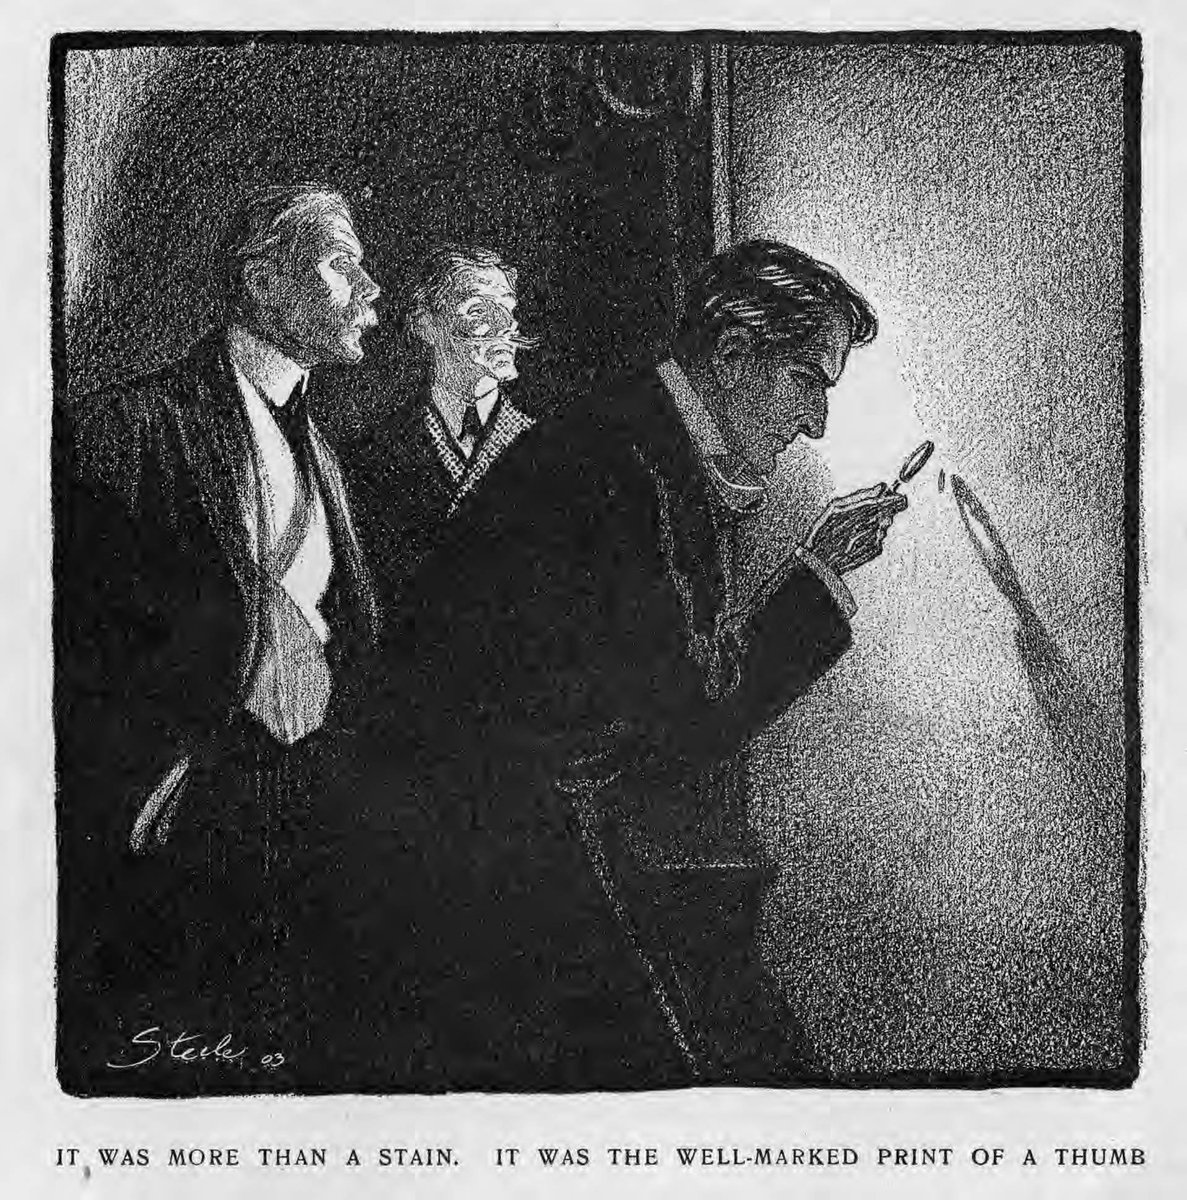 A Steele illustration for "The Norwood Builder" in Collier's Magazine, October 31, 1903  @SherlockUMN  @umnlib. Other portrayals of Holmes present an older detective. FDS reminds readers that Holmes started his career while at university (if not earlier).  http://purl.umn.edu/122683 